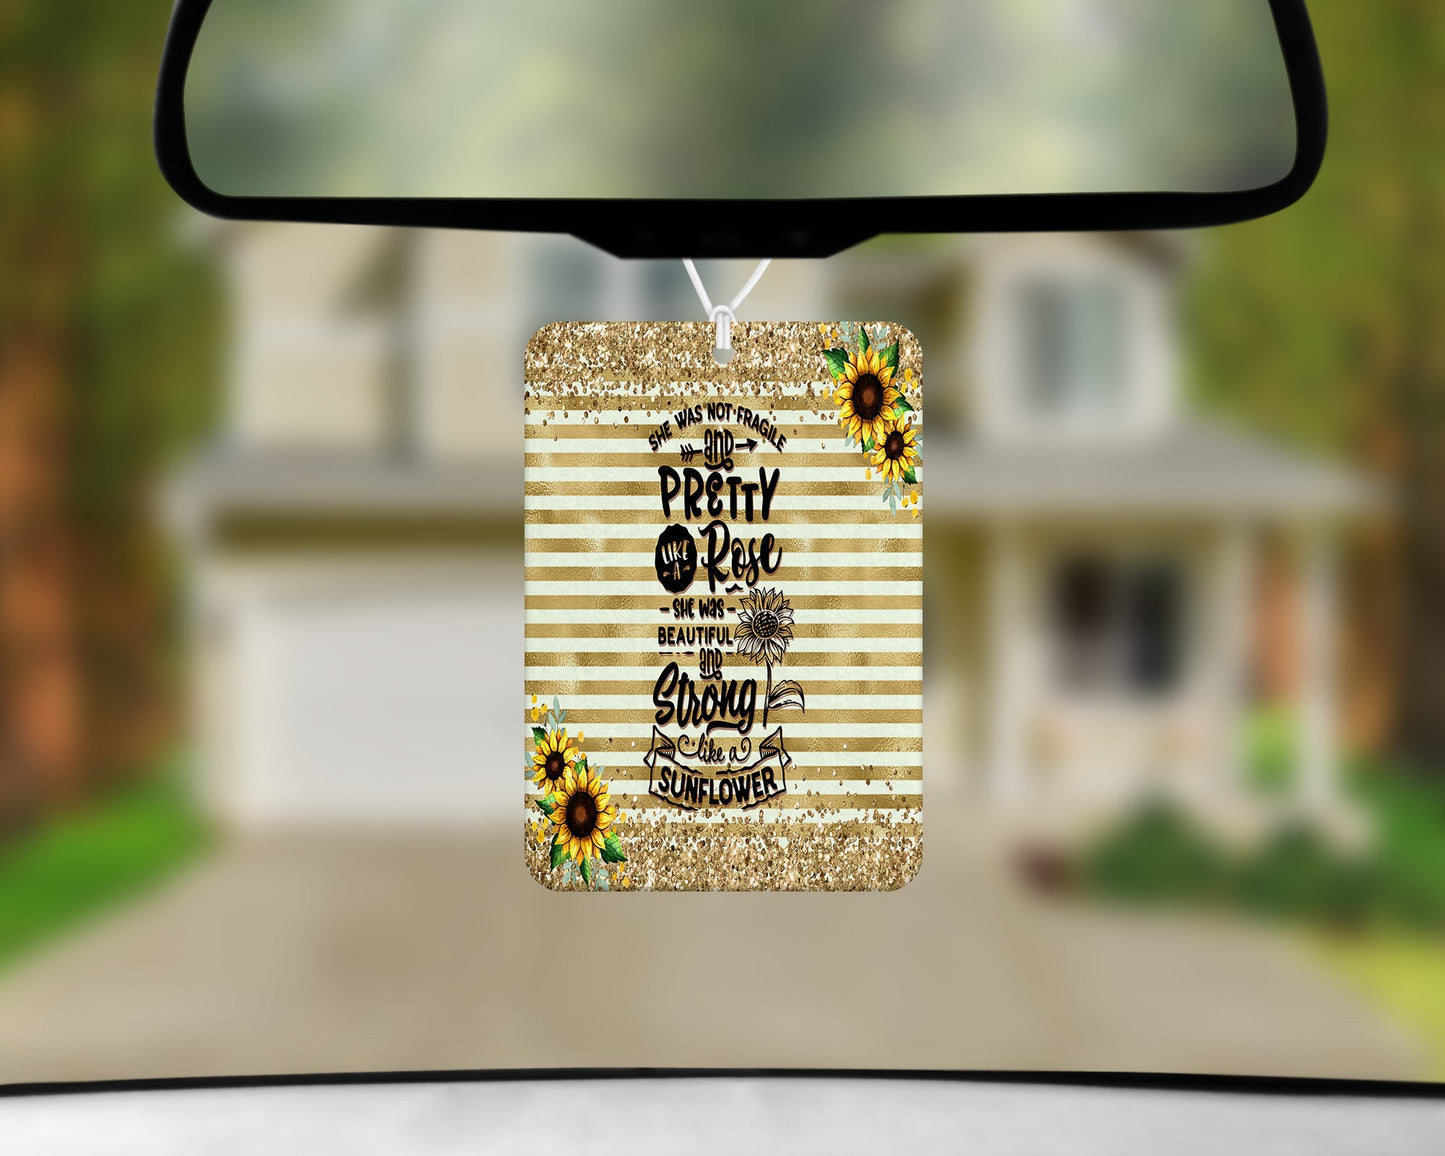 Like A Sunflower|Freshie|Includes Scent Bottle - Vehicle Air Freshener